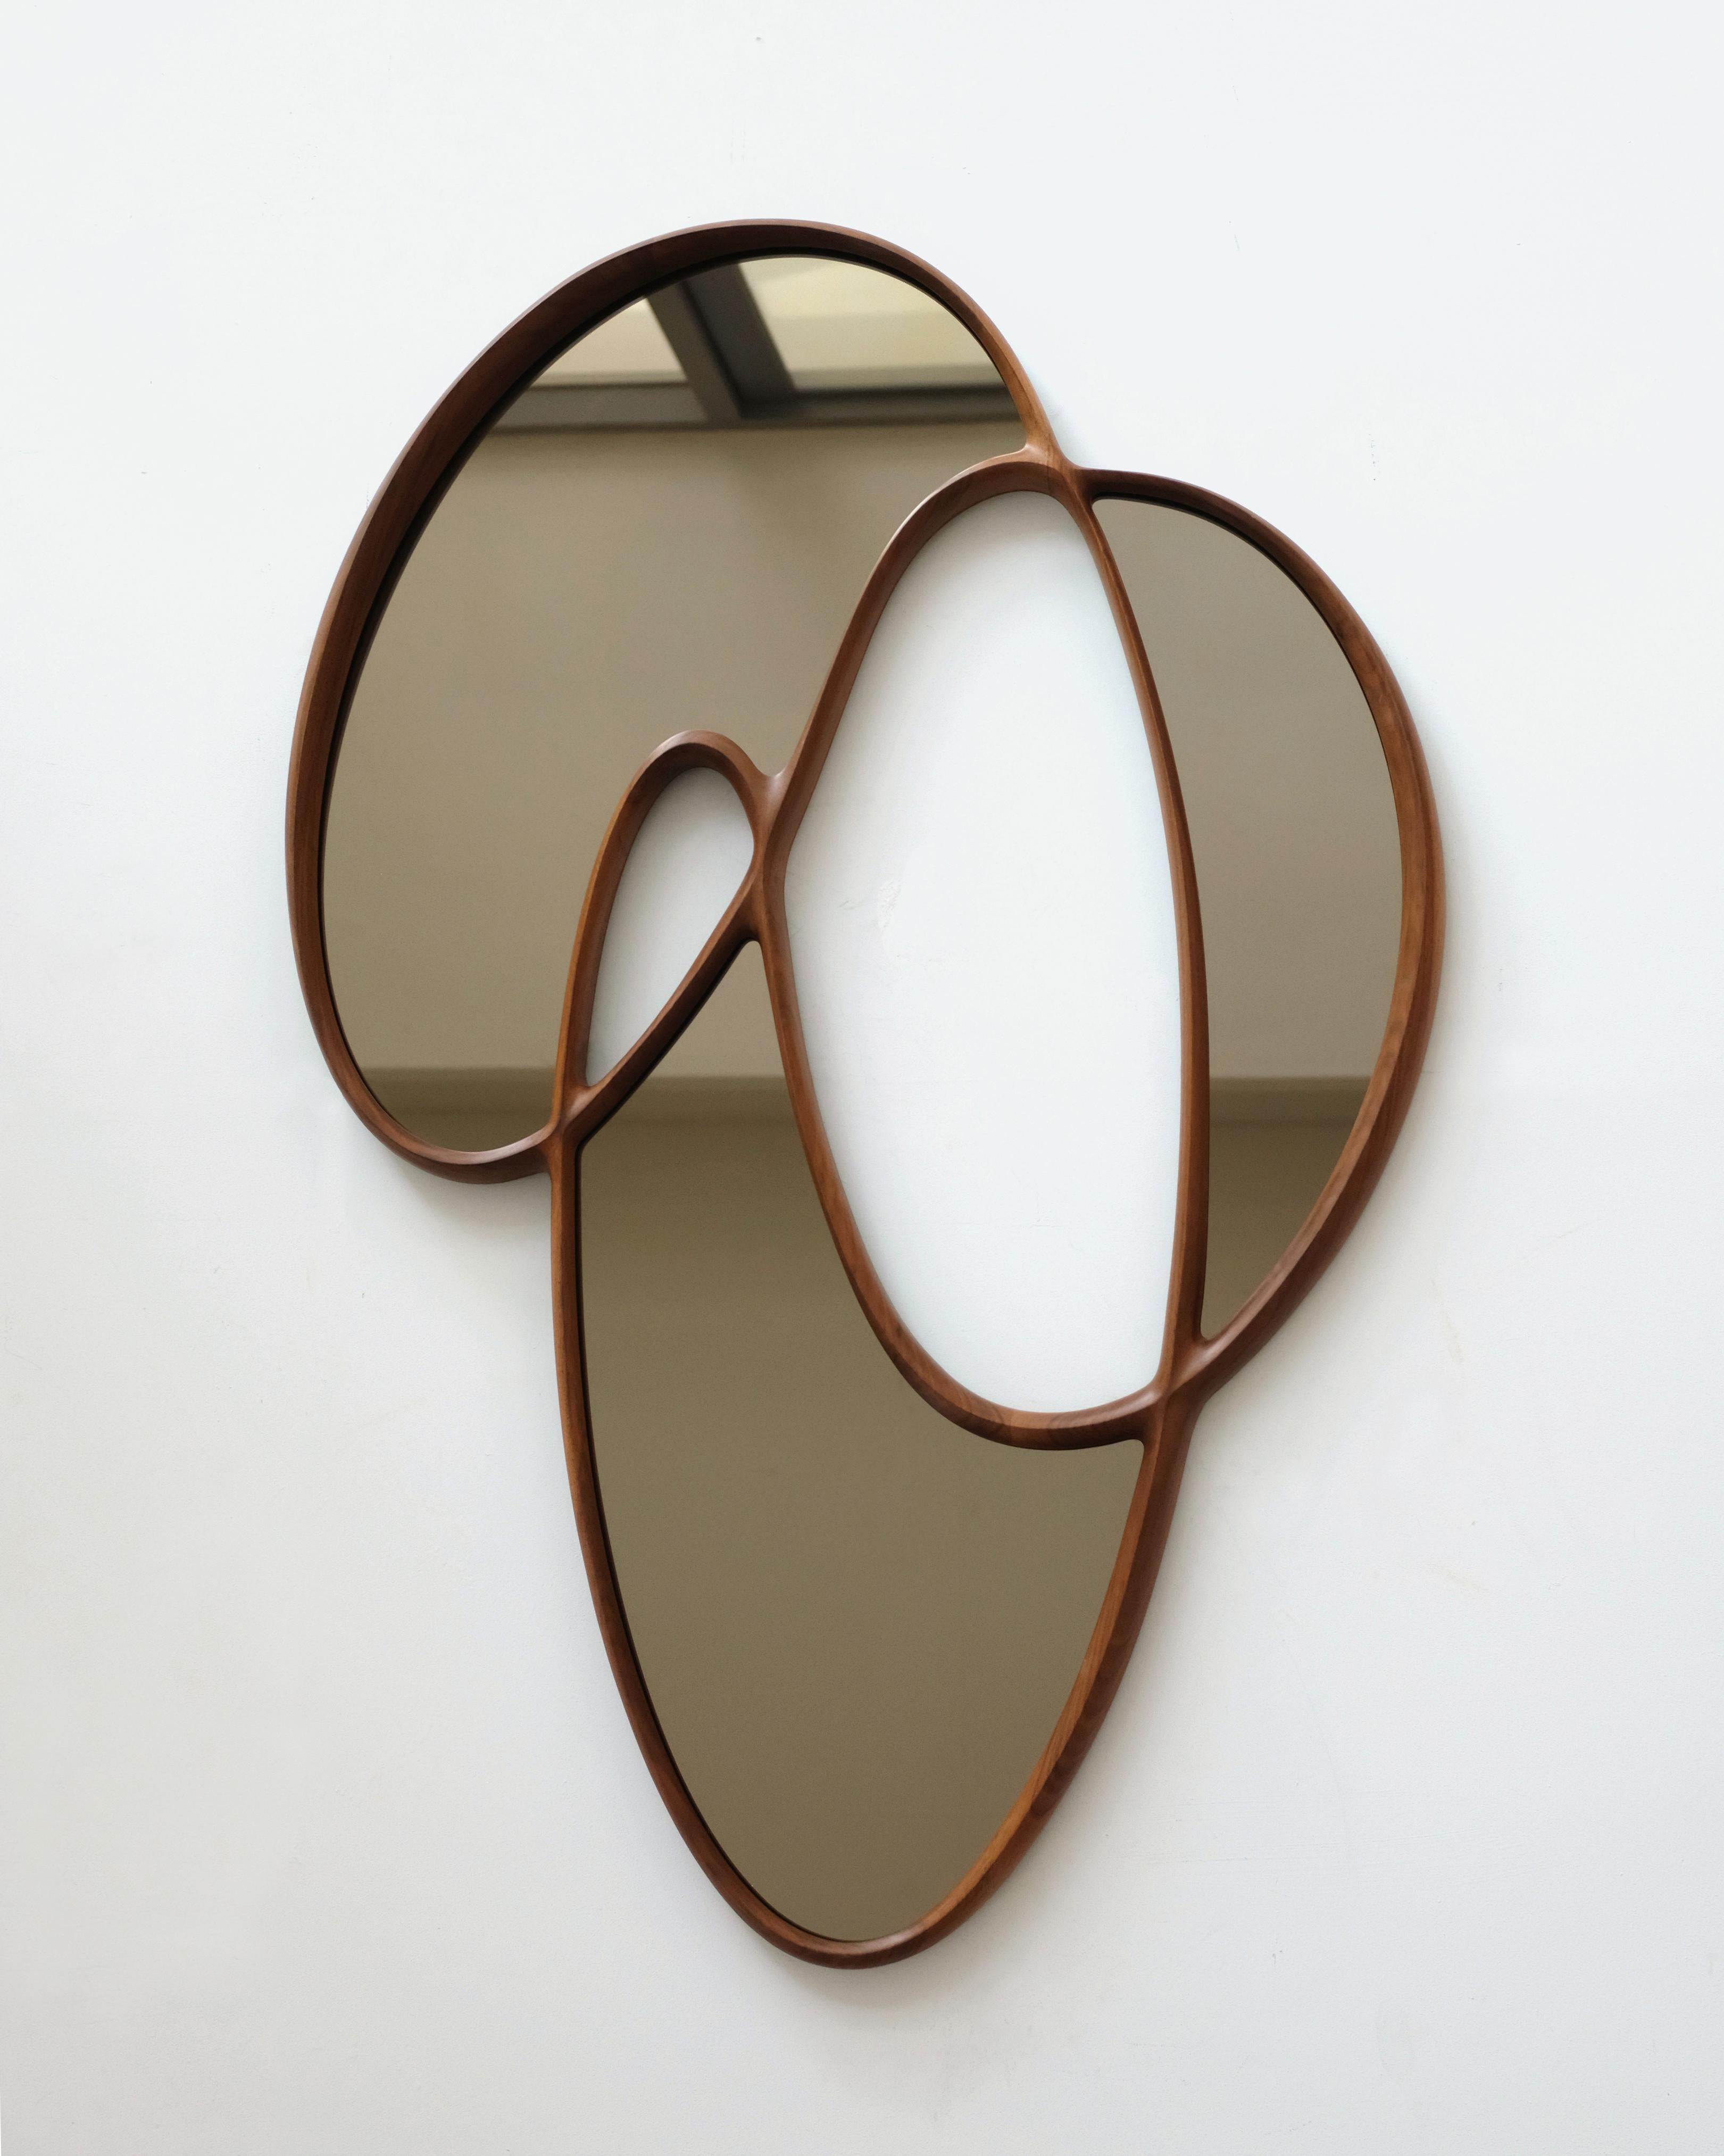 'Dynamic Mirror I' by Soo Joo is a statement wooden wall mirror with a unique and timeless asymmetric form. It hangs flush to the wall with custom-made steel French cleats, and can be hung horizontally or vertically.

This organic mirror silhouette